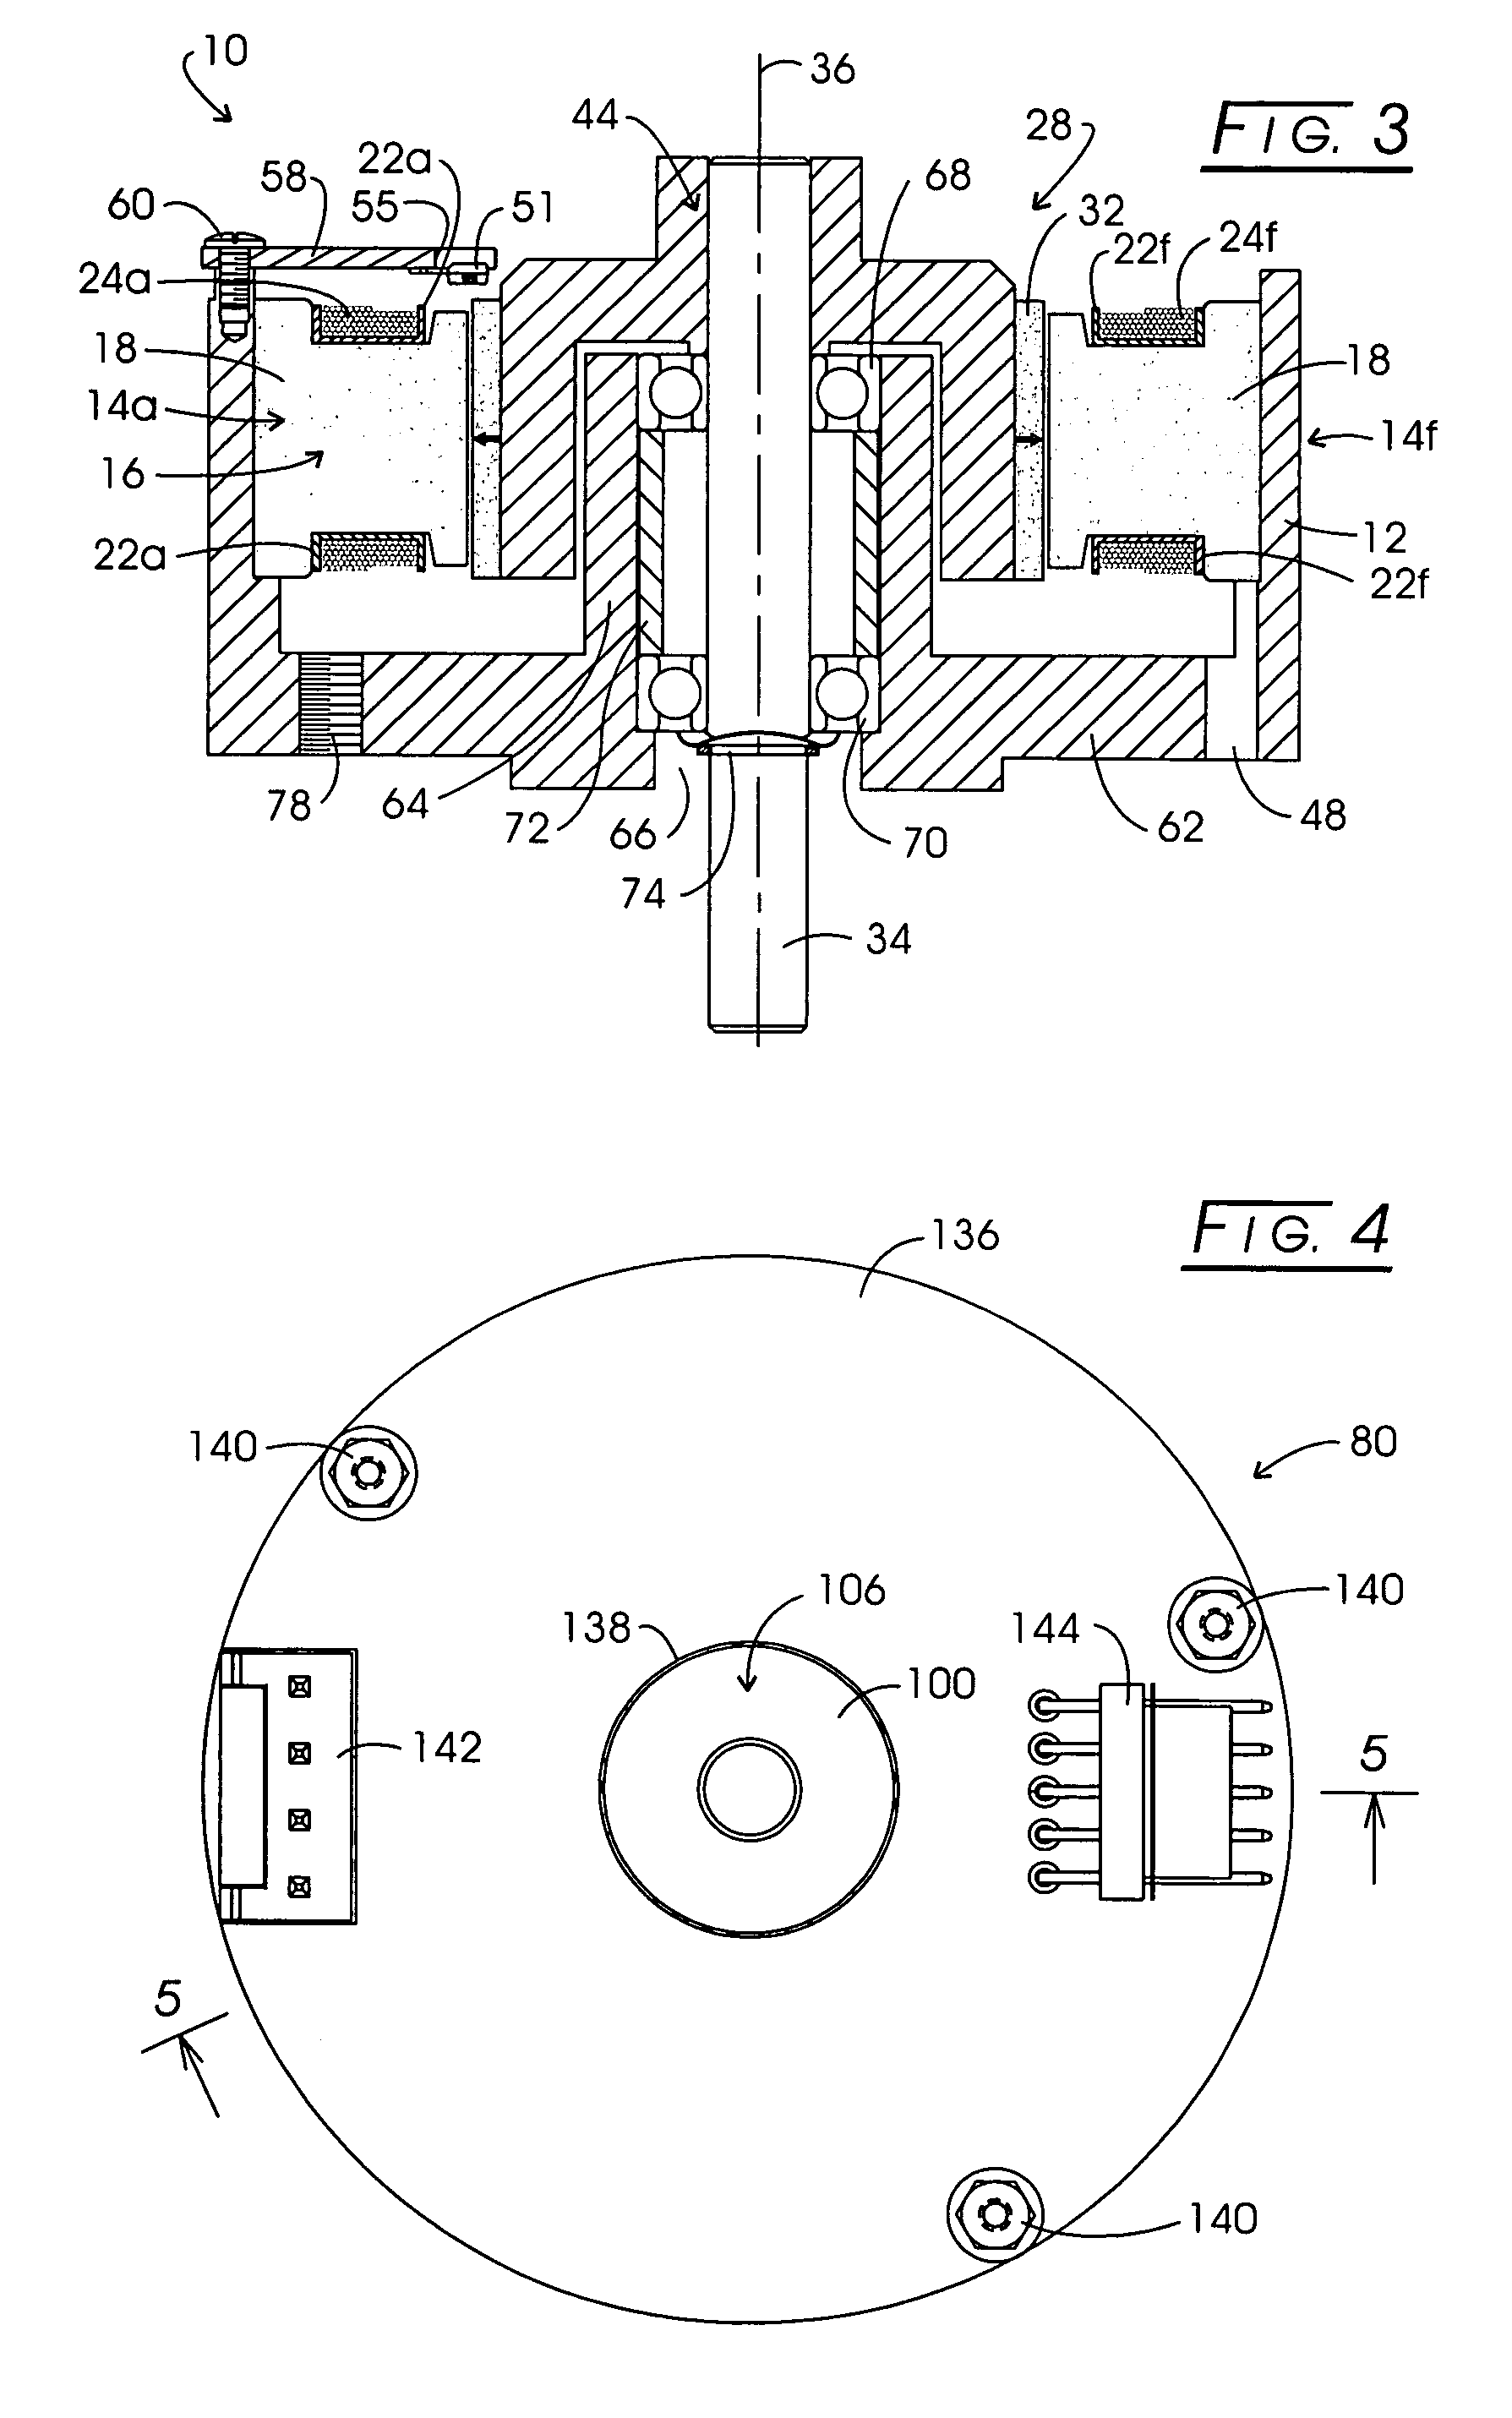 Apparatus and method for dissipating a portion of the commutation derived collapsing field energy in a multi-phase unipolar electric motor